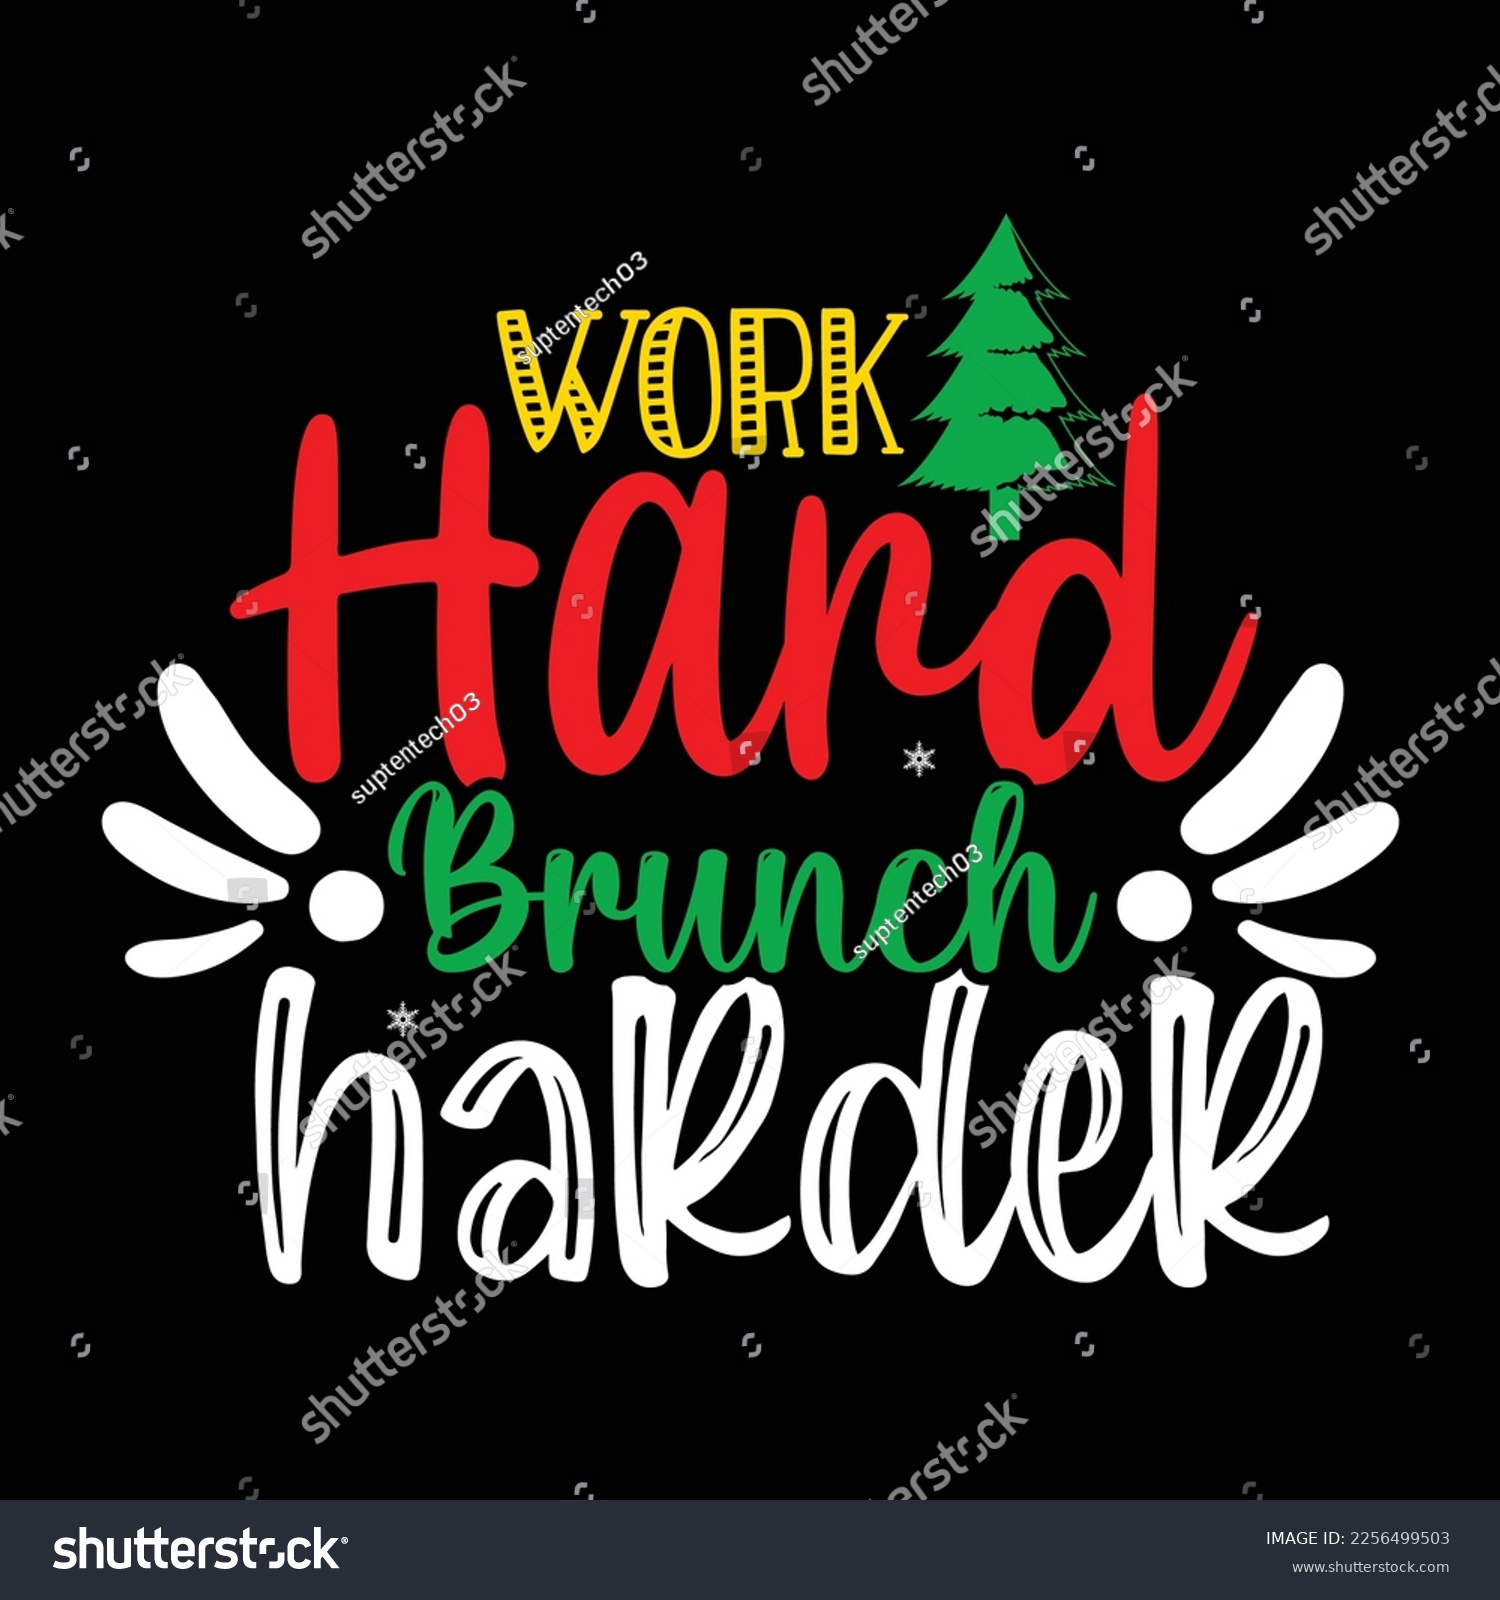 SVG of Work Hard Brunch harder, Merry Christmas shirts Print Template, Xmas Ugly Snow Santa Clouse New Year Holiday Candy Santa Hat vector illustration for Christmas hand lettered svg